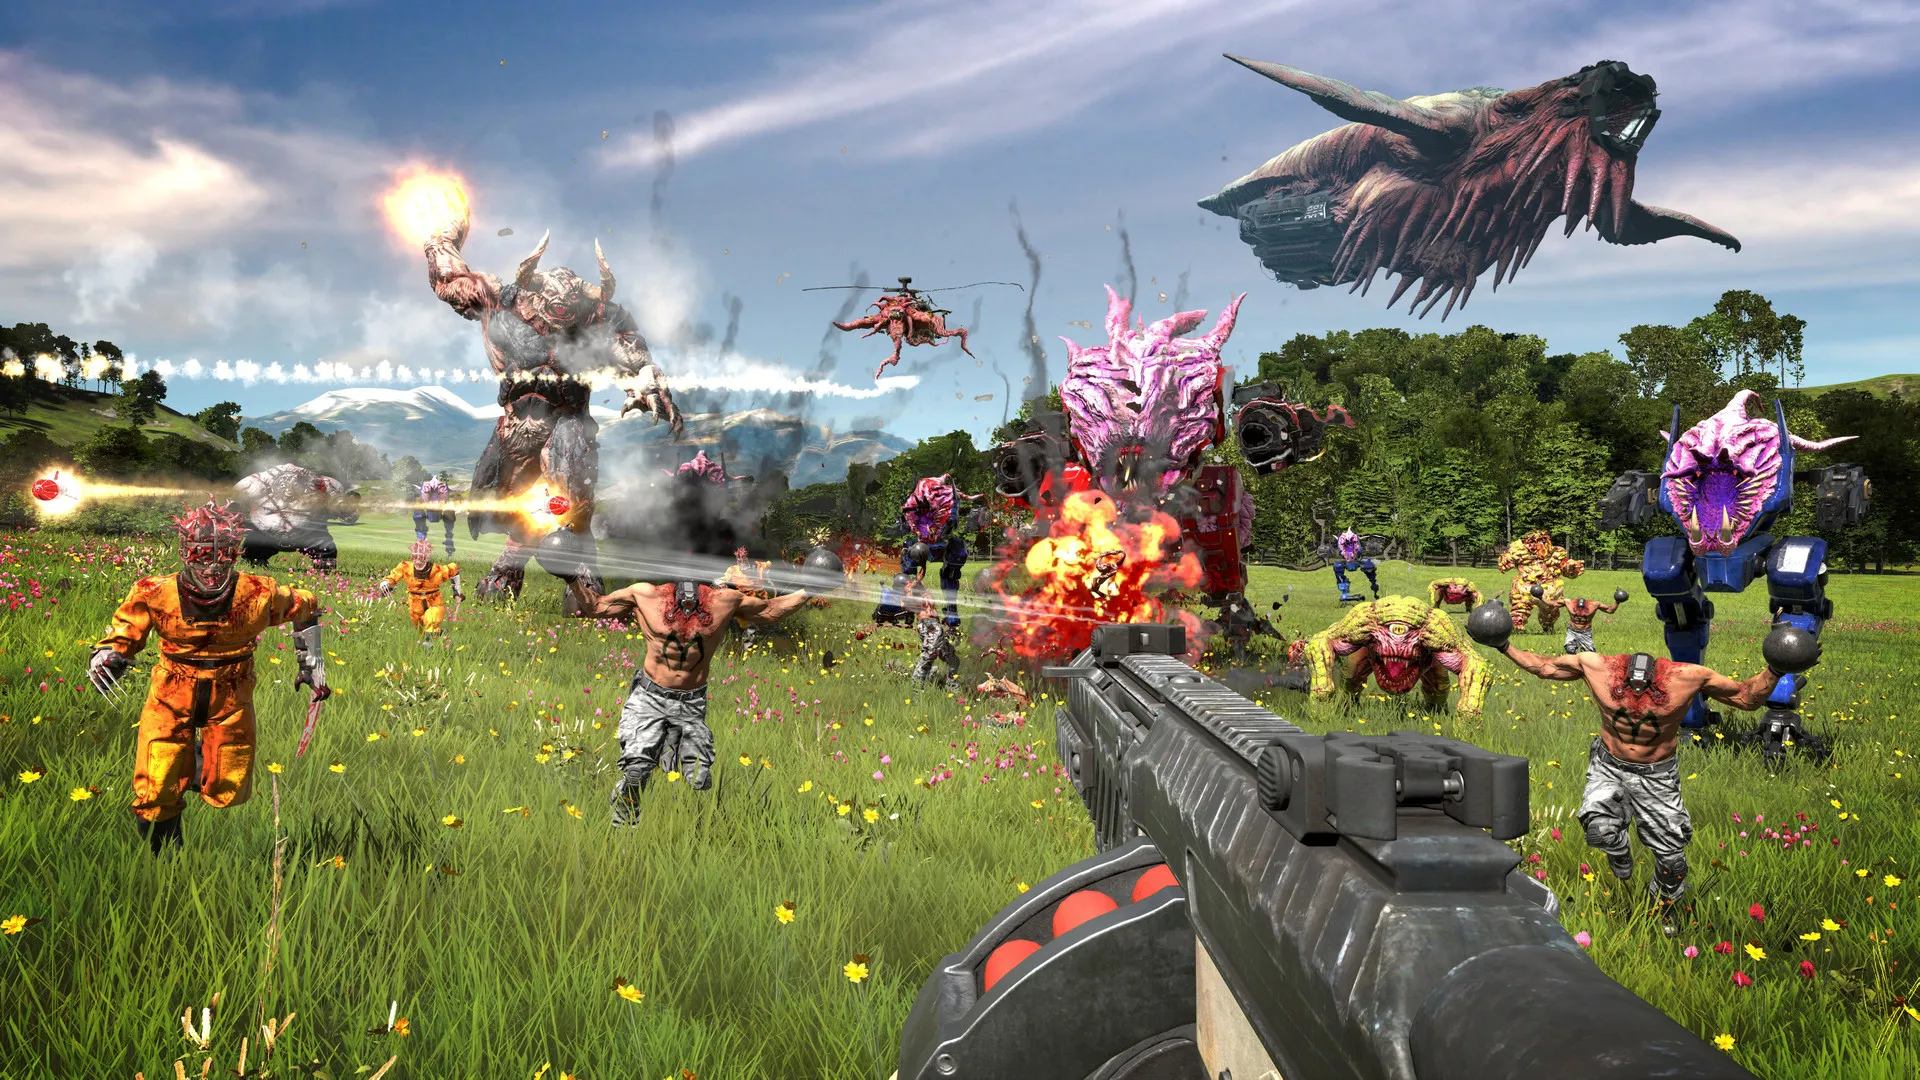 Serious Sam 4 PC requirements - minimum and recommended specs